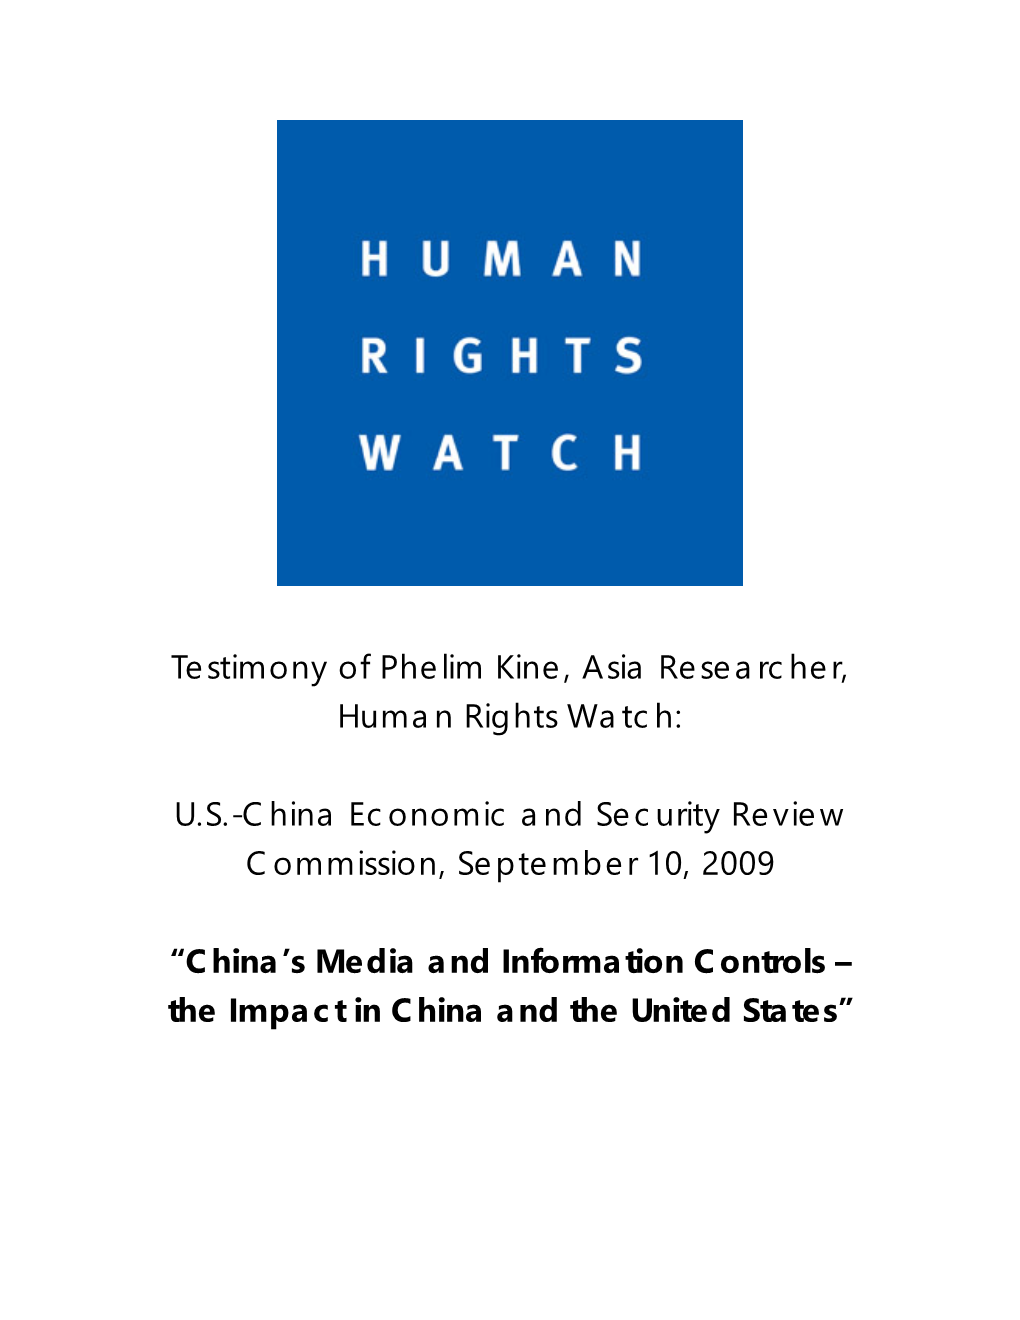 Testimony of Phelim Kine, Asia Researcher, Human Rights Watch